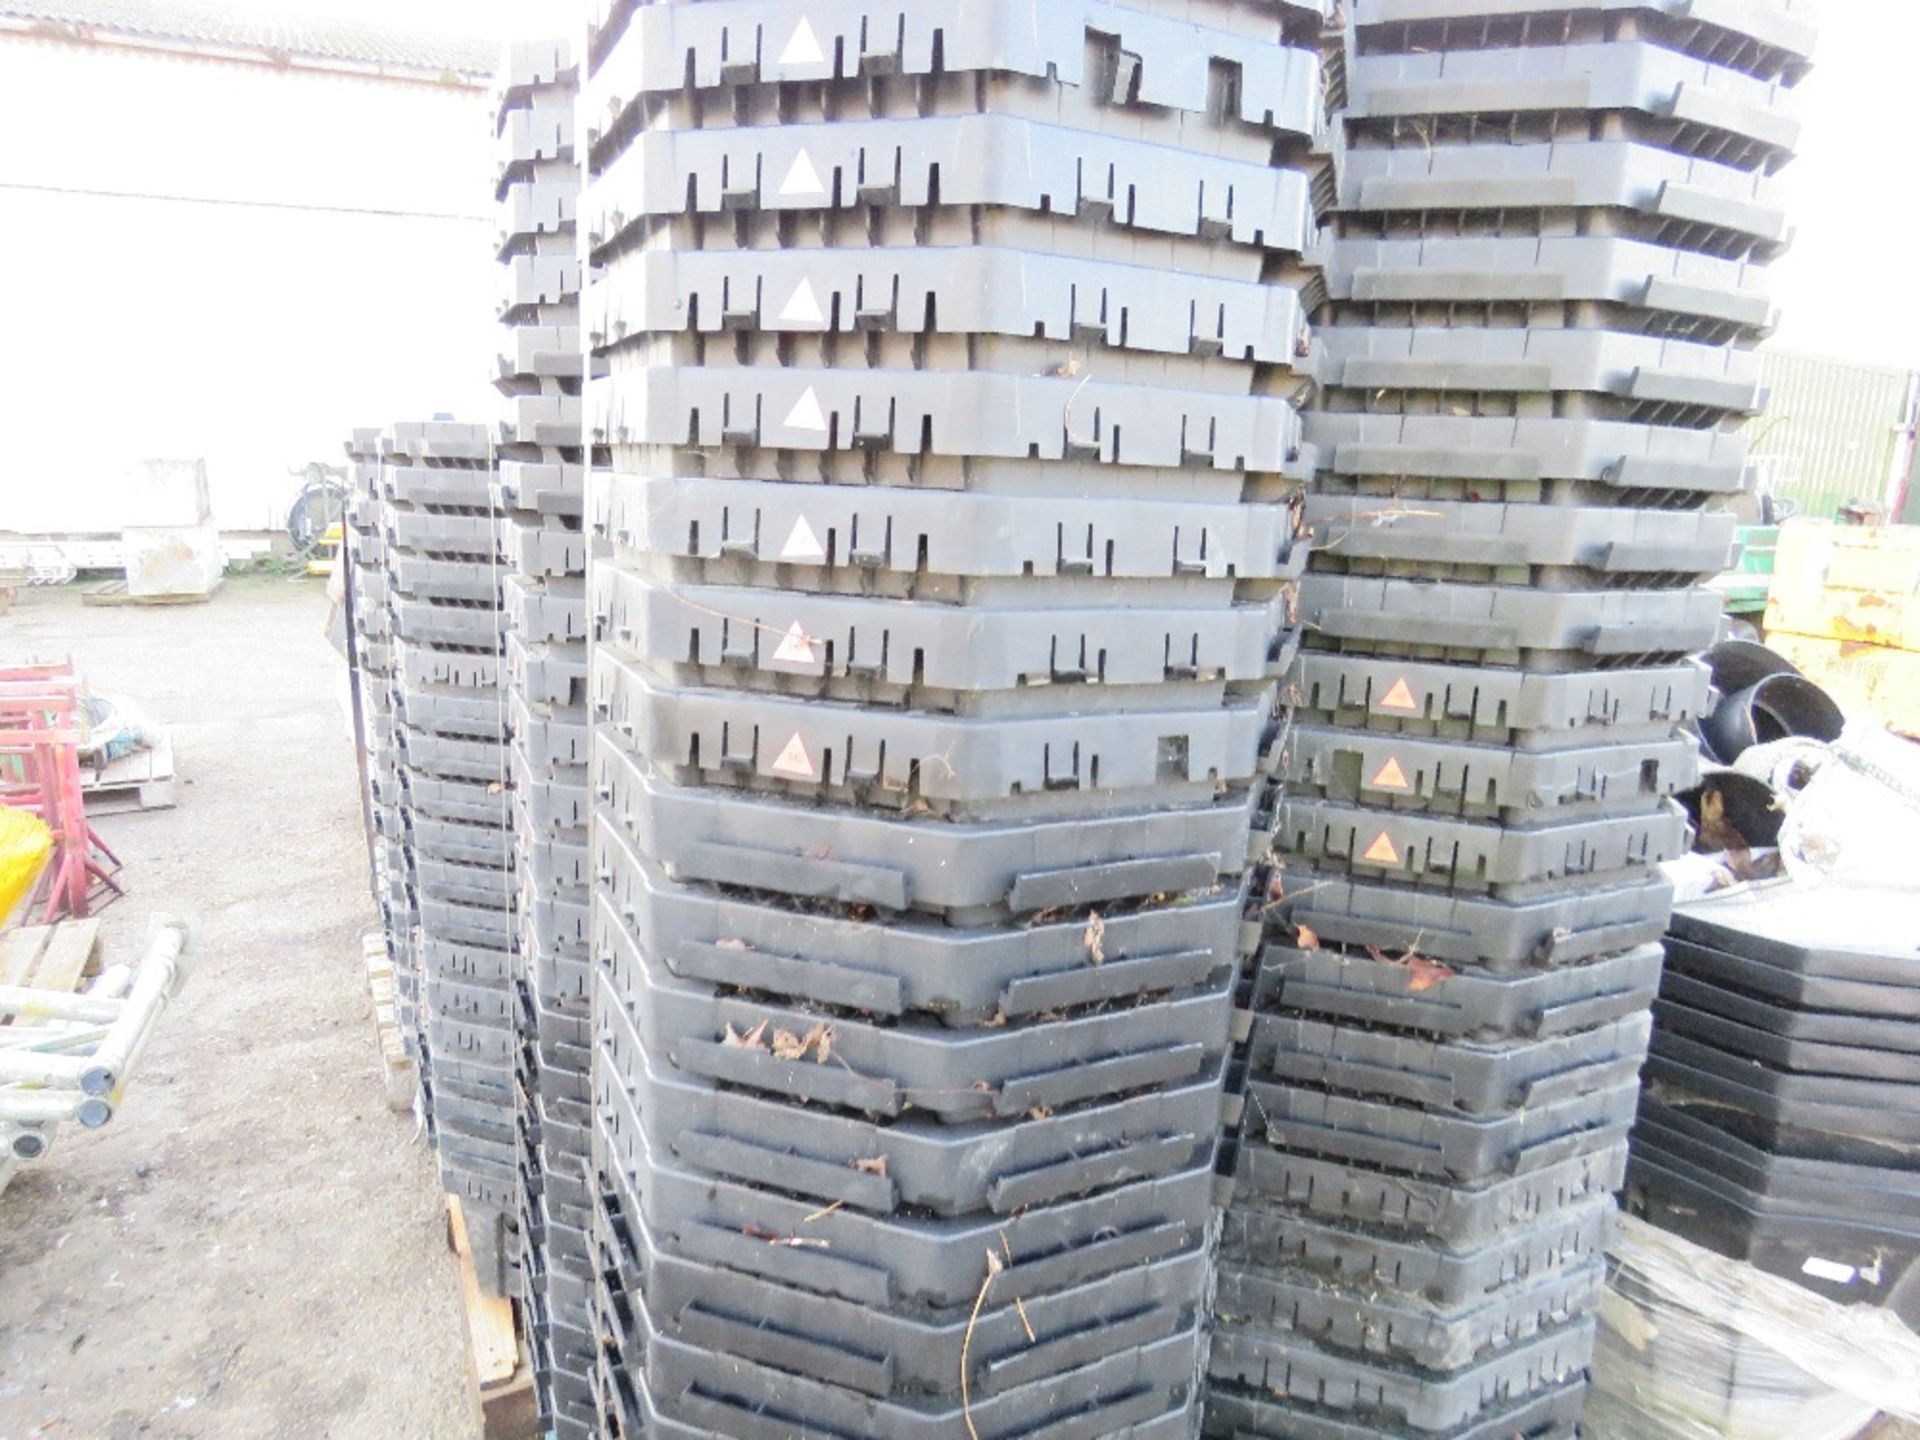 2 X PALLETS OF GREENLEAF URBAN TREE ROOT SYSTEMS. - Image 5 of 5